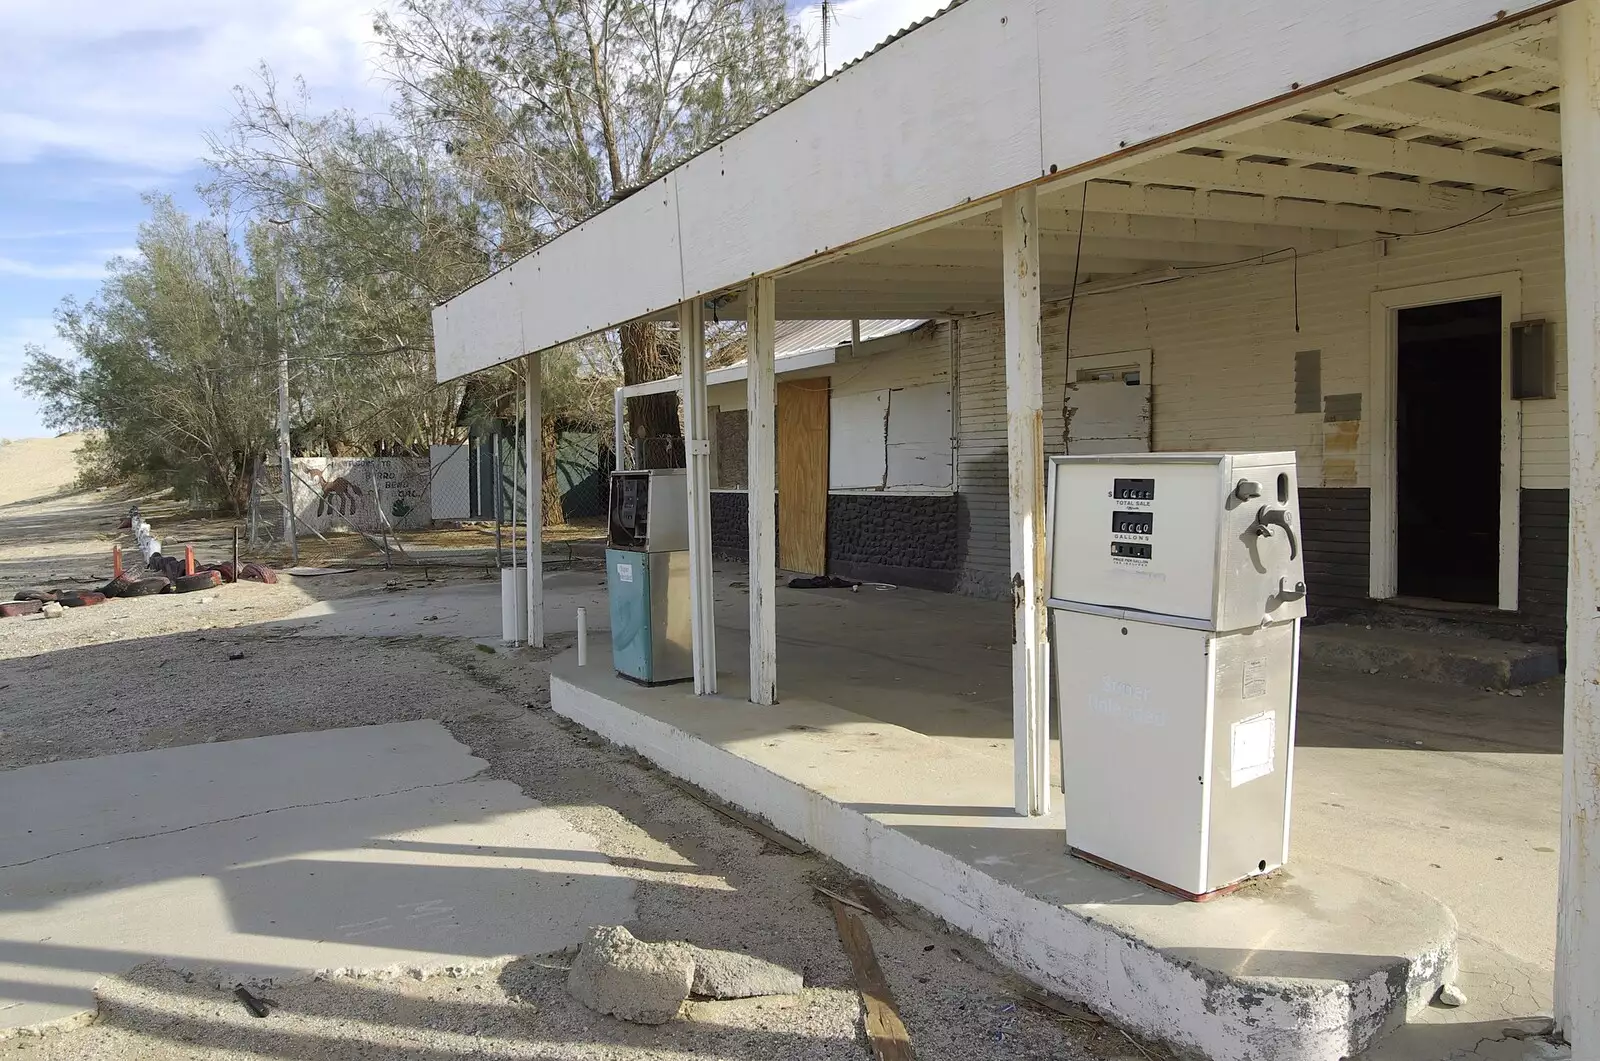 The old petrol station forecourt, from The End of the World: Julian to the Salton Sea and Back, California, US - 1st March 2008